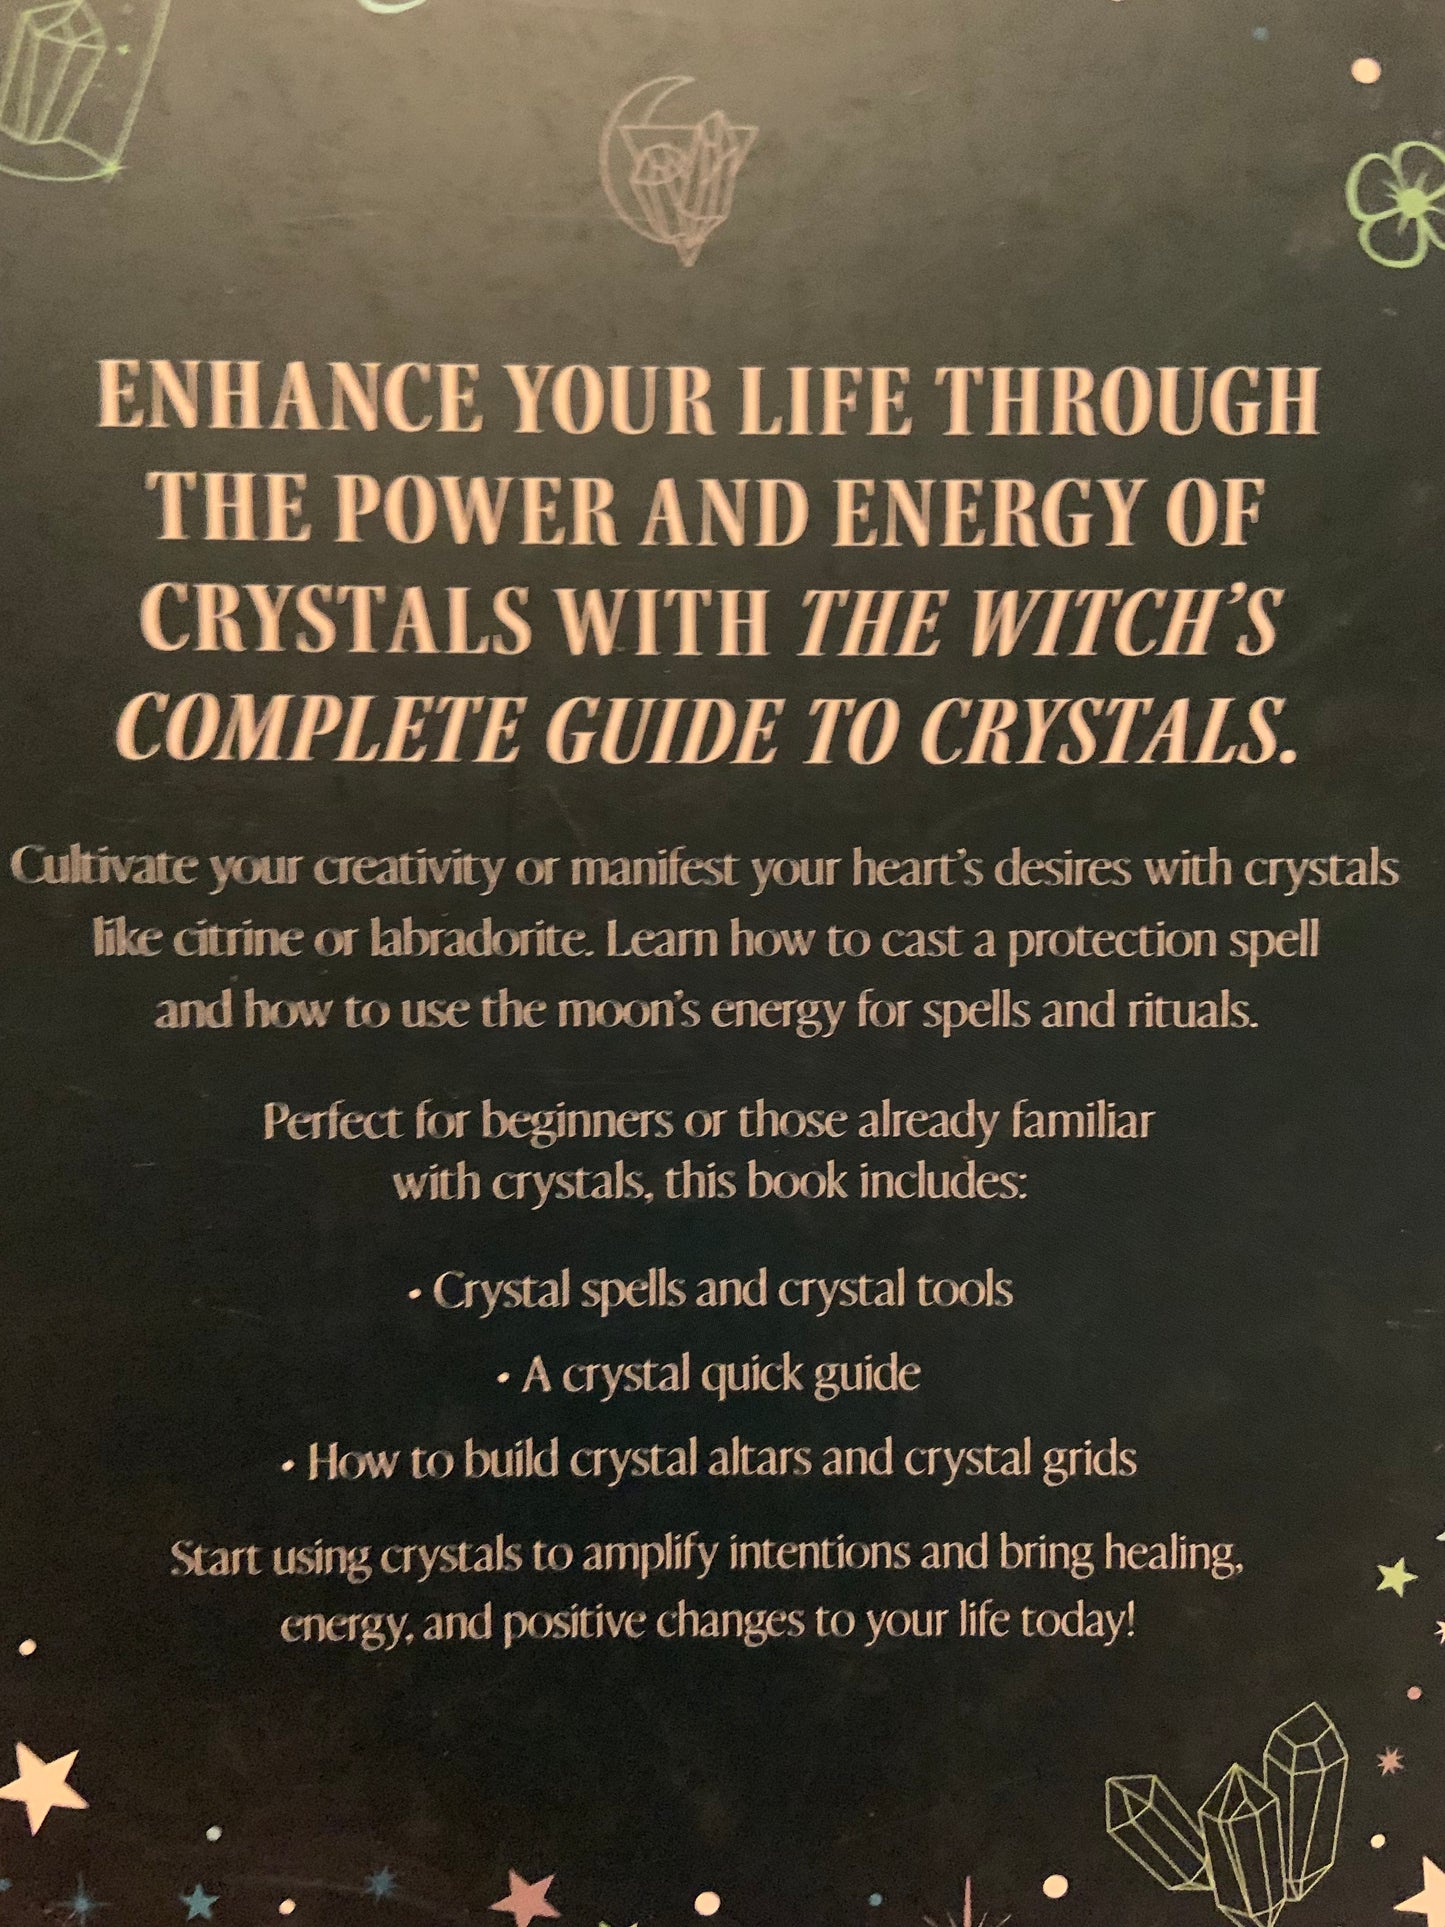 The Witch’s Complete Guide to Crystals book